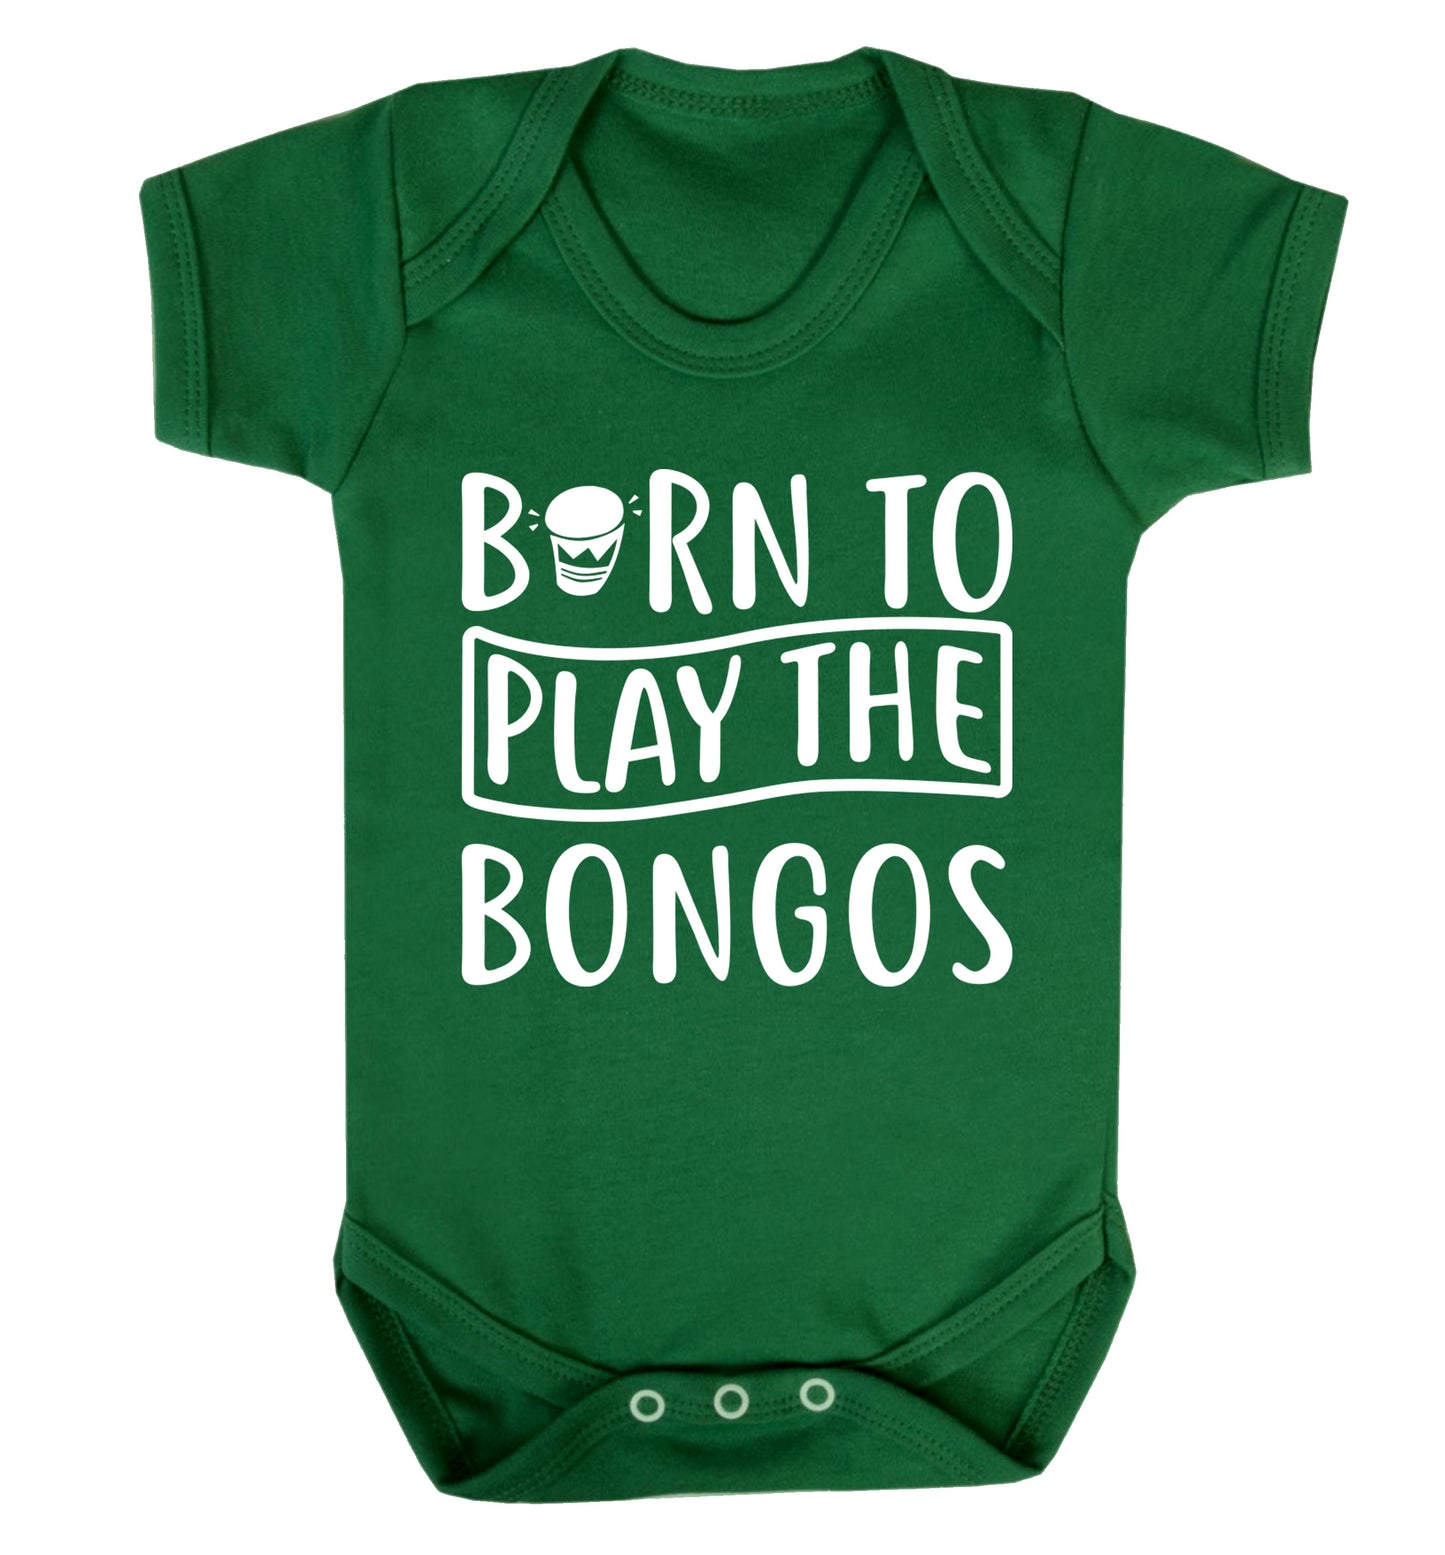 Born to play the bongos Baby Vest green 18-24 months